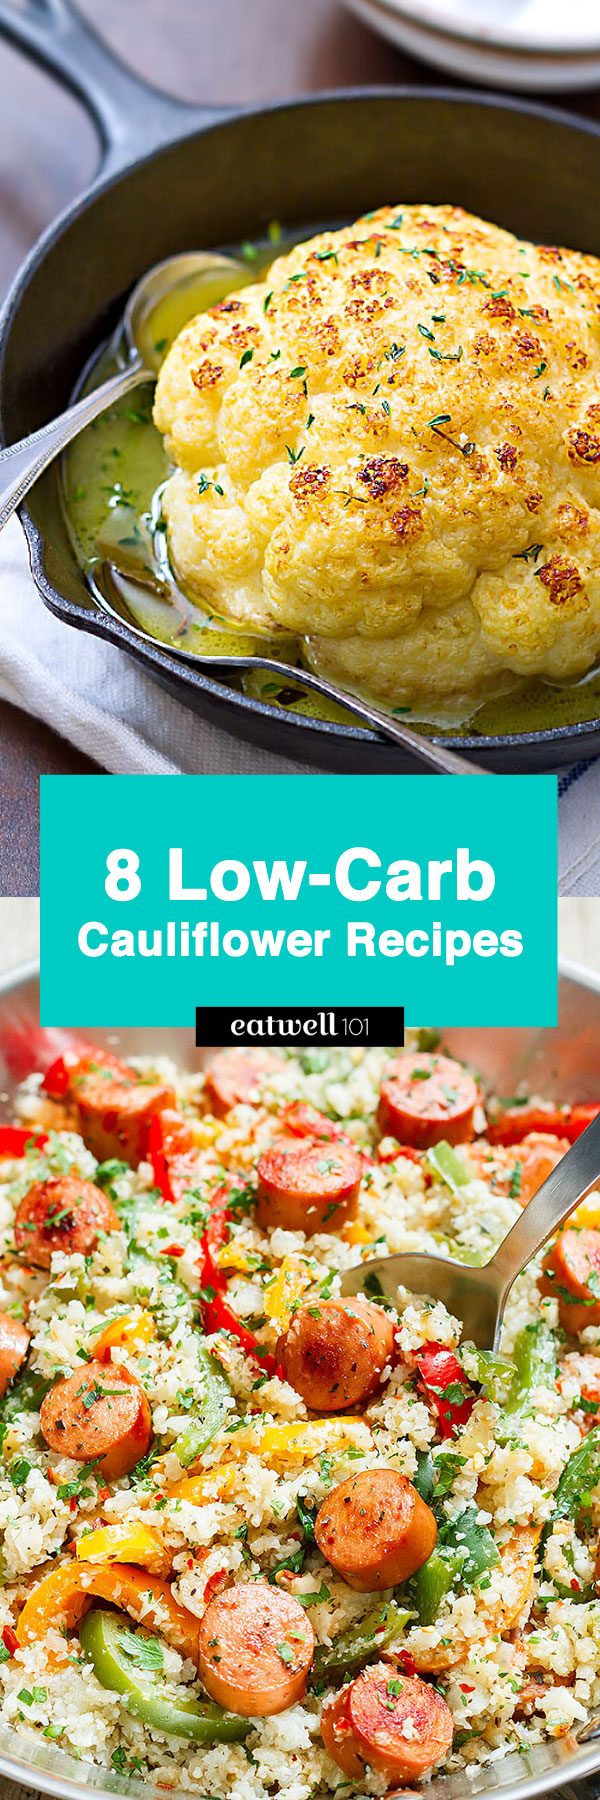 Low-Carb Cauliflower Recipes - Enrich your carb-free cooking repertoire with these 8 delicious recipes.